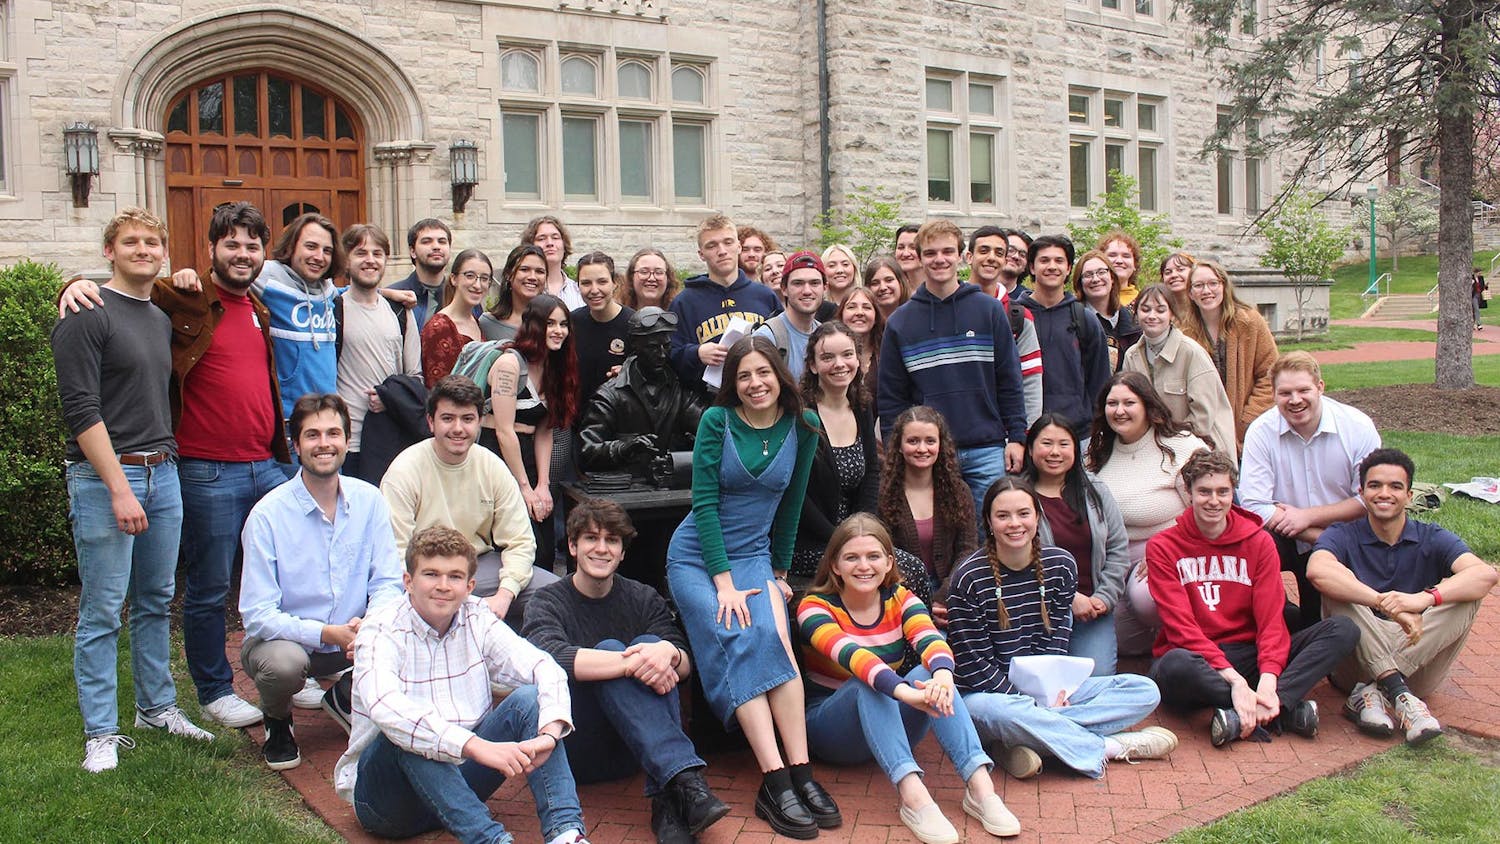 The spring 2023 staff of the Indiana Daily Student gathers for an end-of-the-semester photo outside of Franklin Hall.